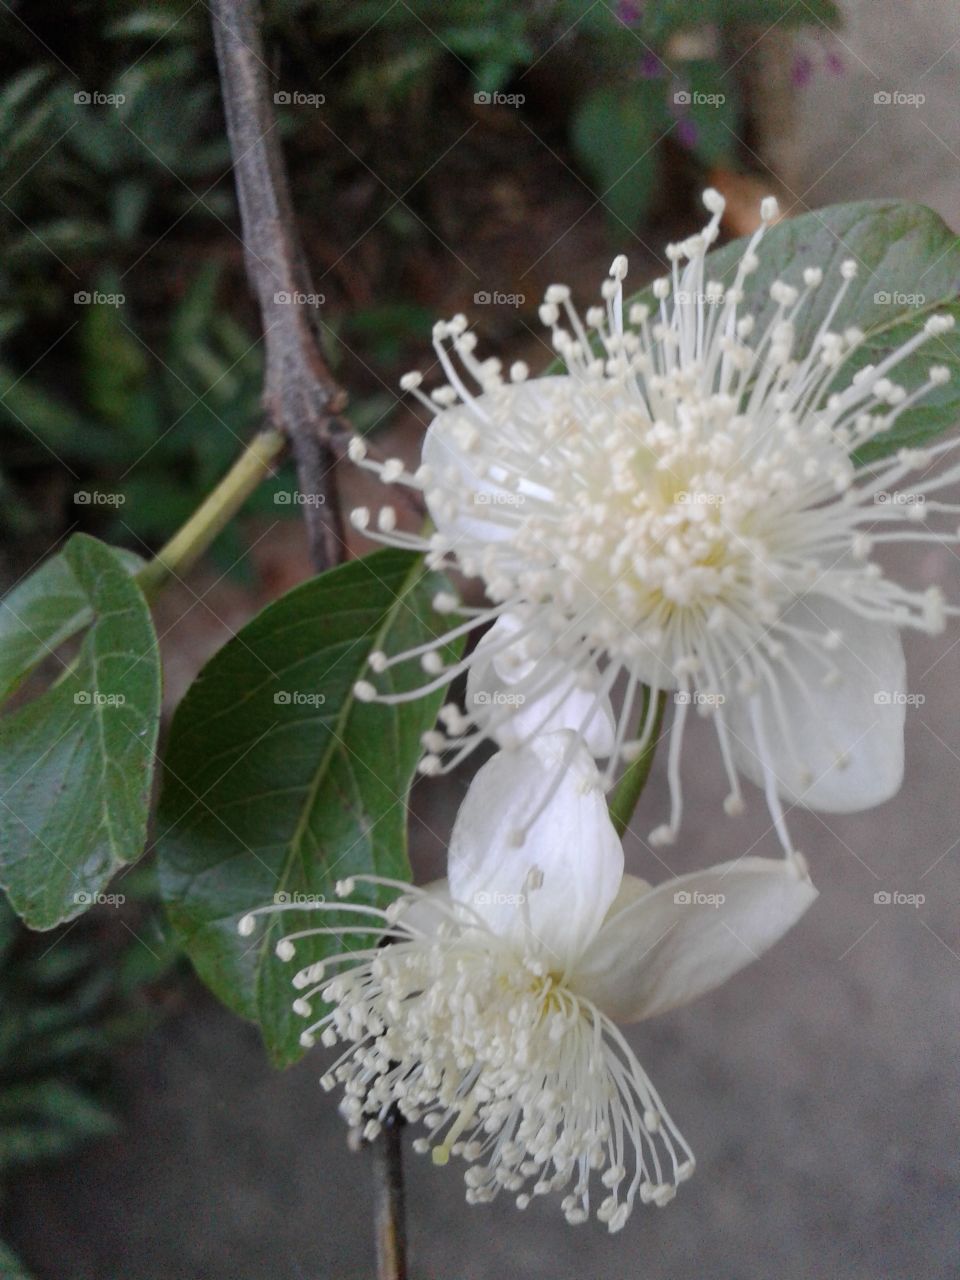 Guava flowers